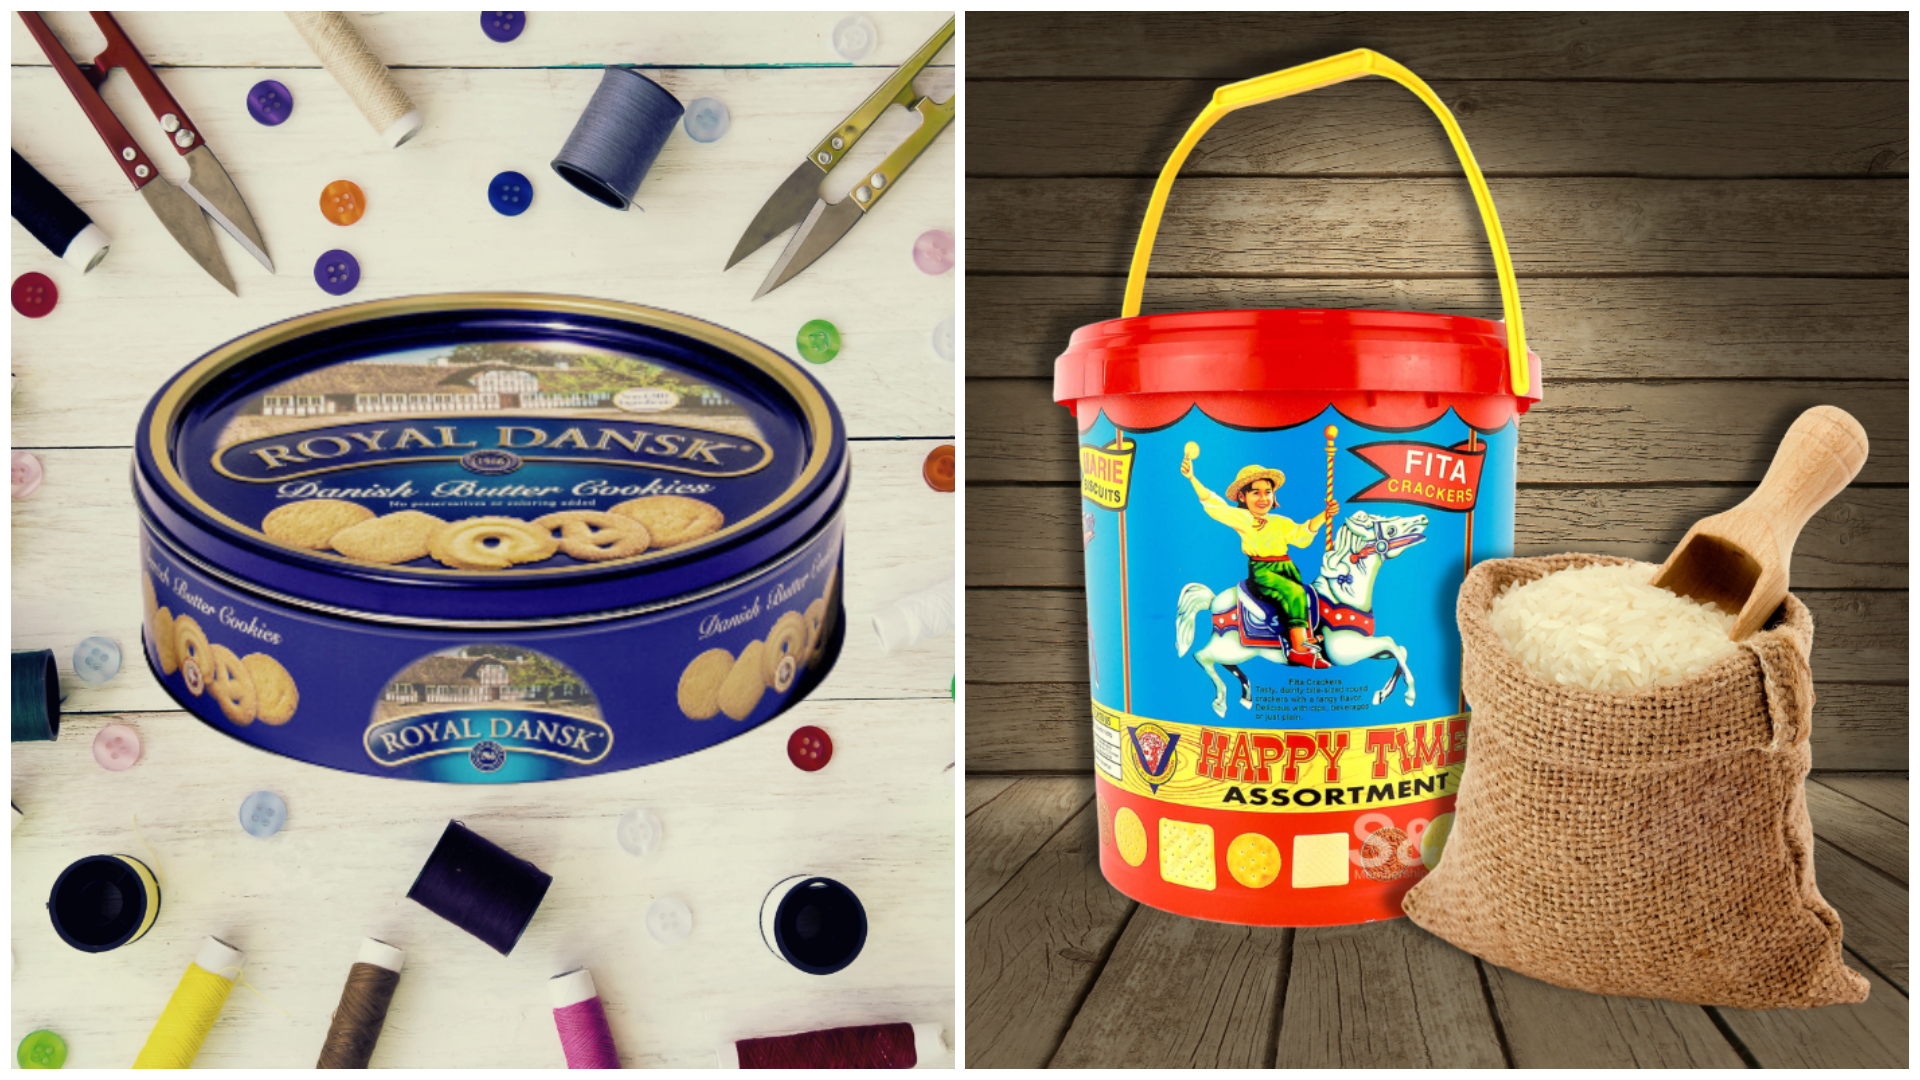 #FilipinoMind: Containers Made Into Sewing Kits & Many More